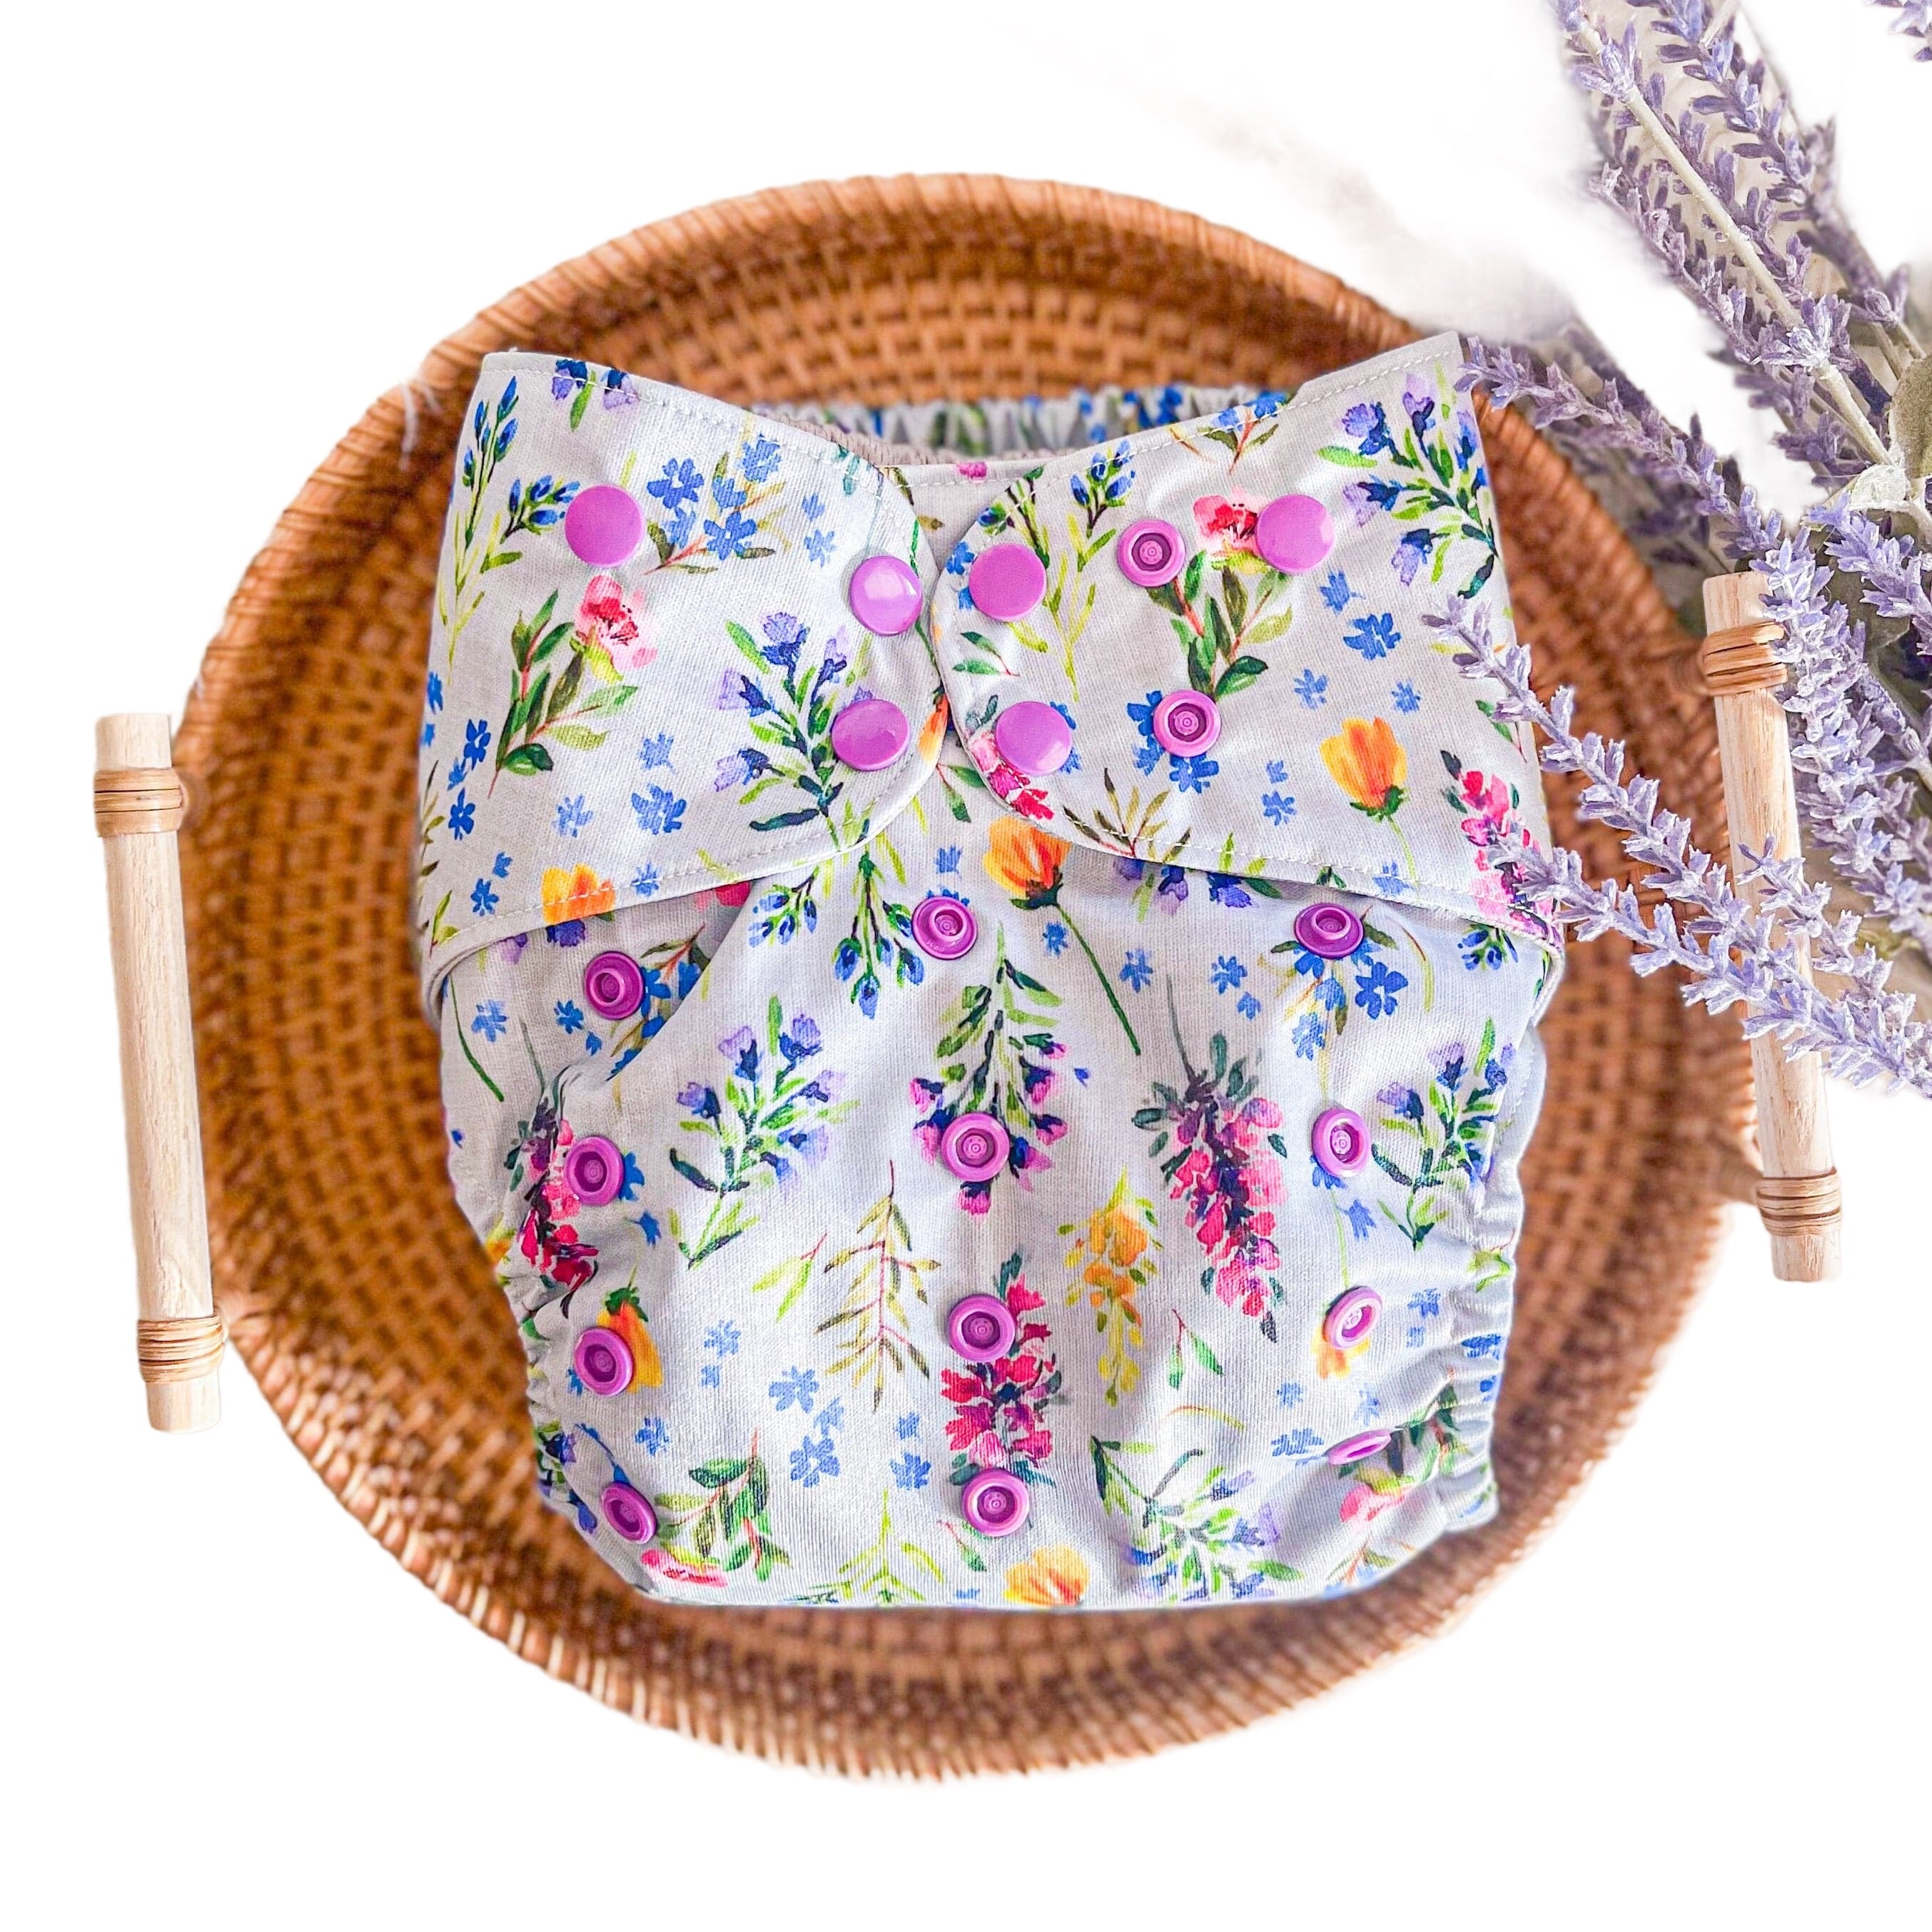 The "ez" Pocket Diaper By Happy Beehinds - Creative Collection